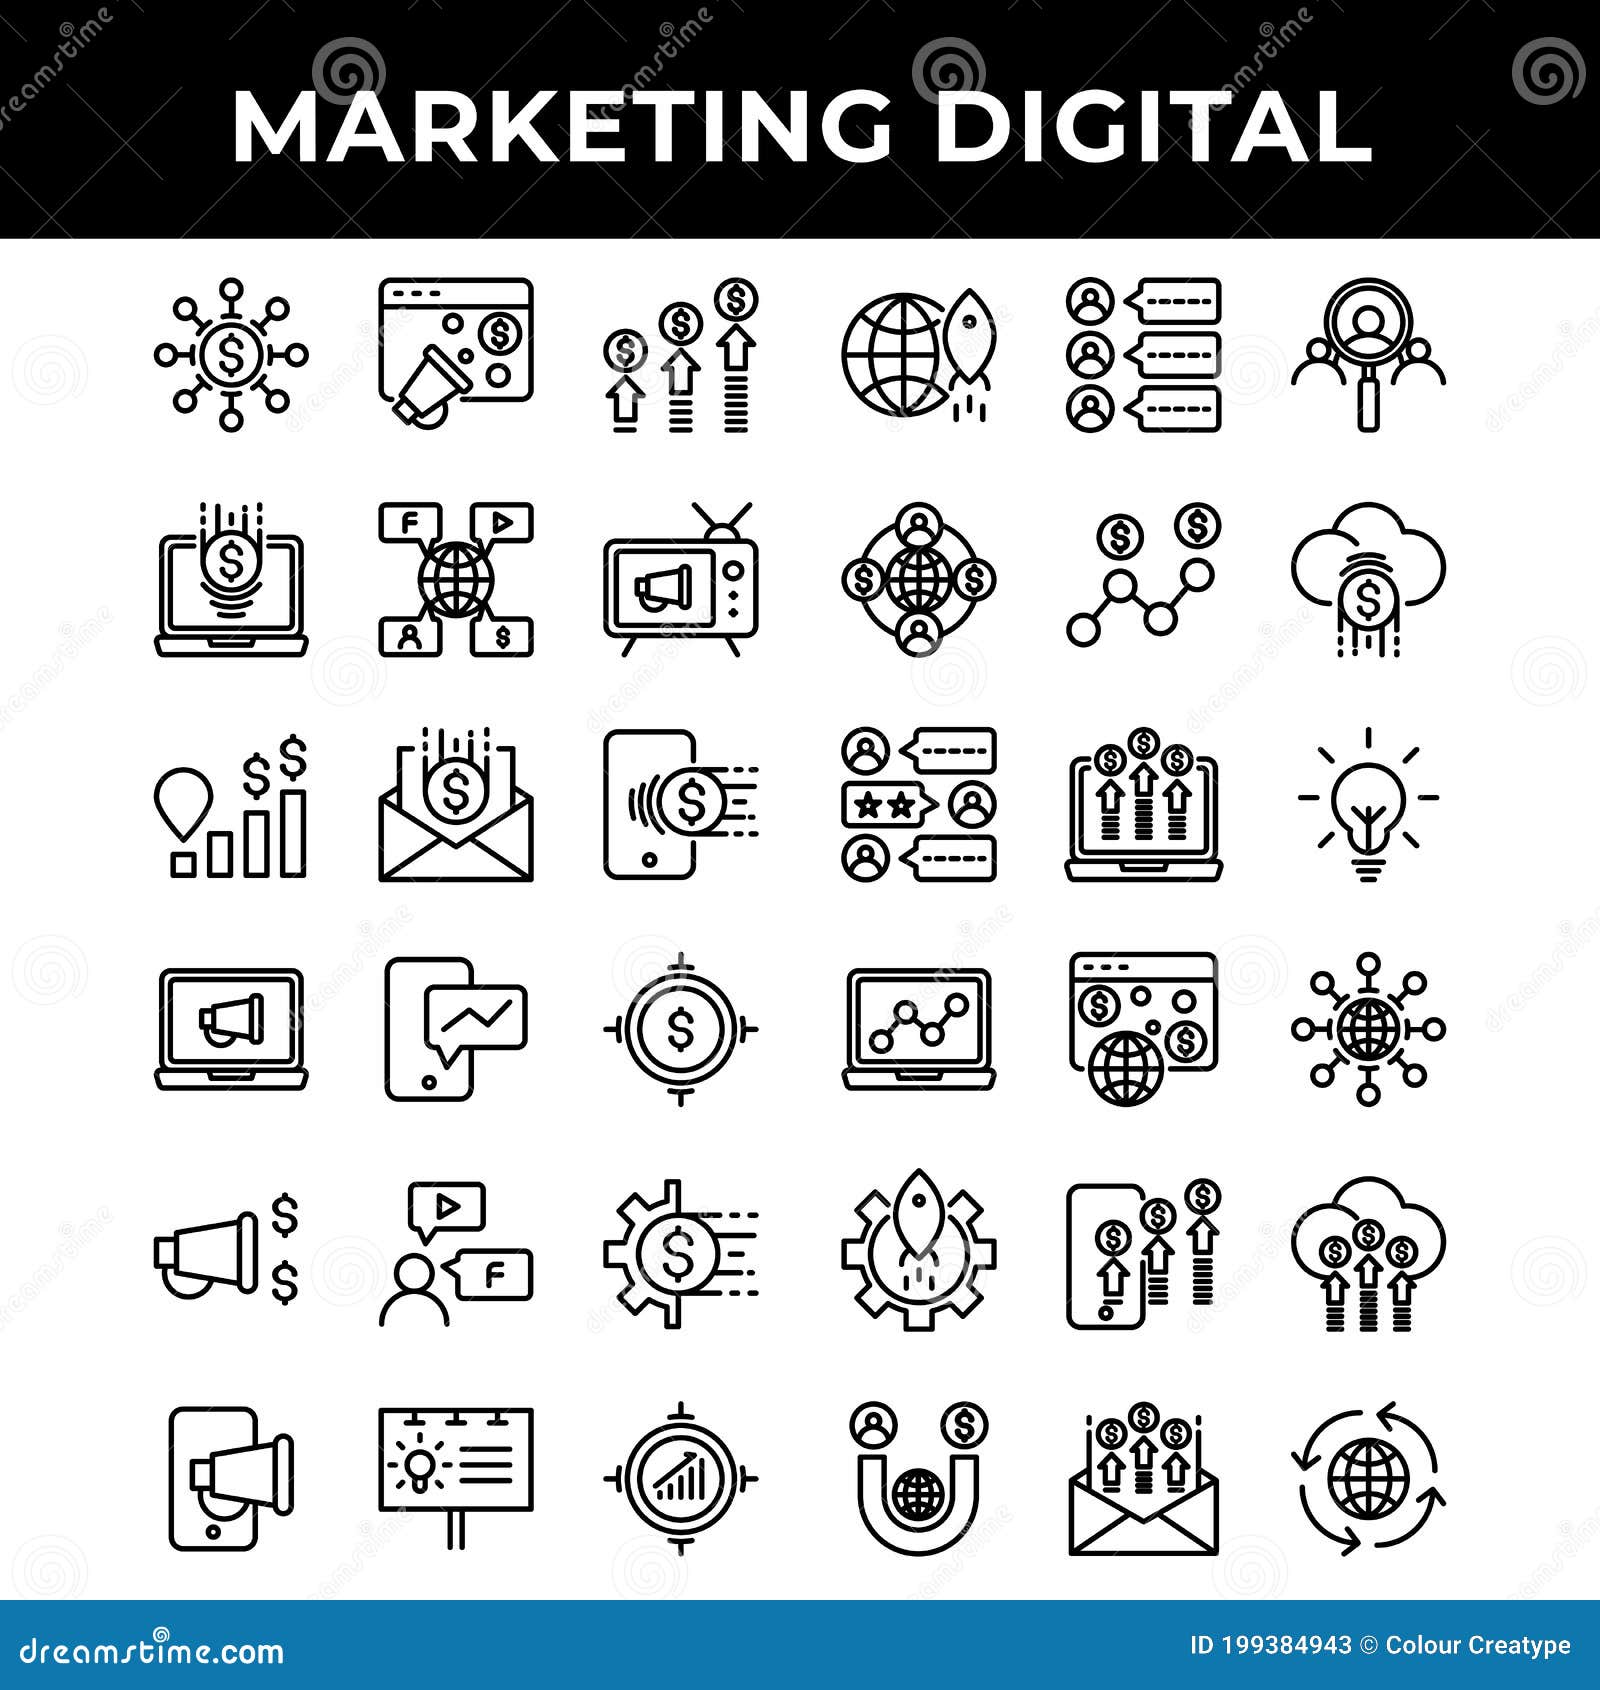 marketing digital icon set include promotion,advertising,mail,phone,laptop,microphone,promotion,gear,banner,target,network,money,